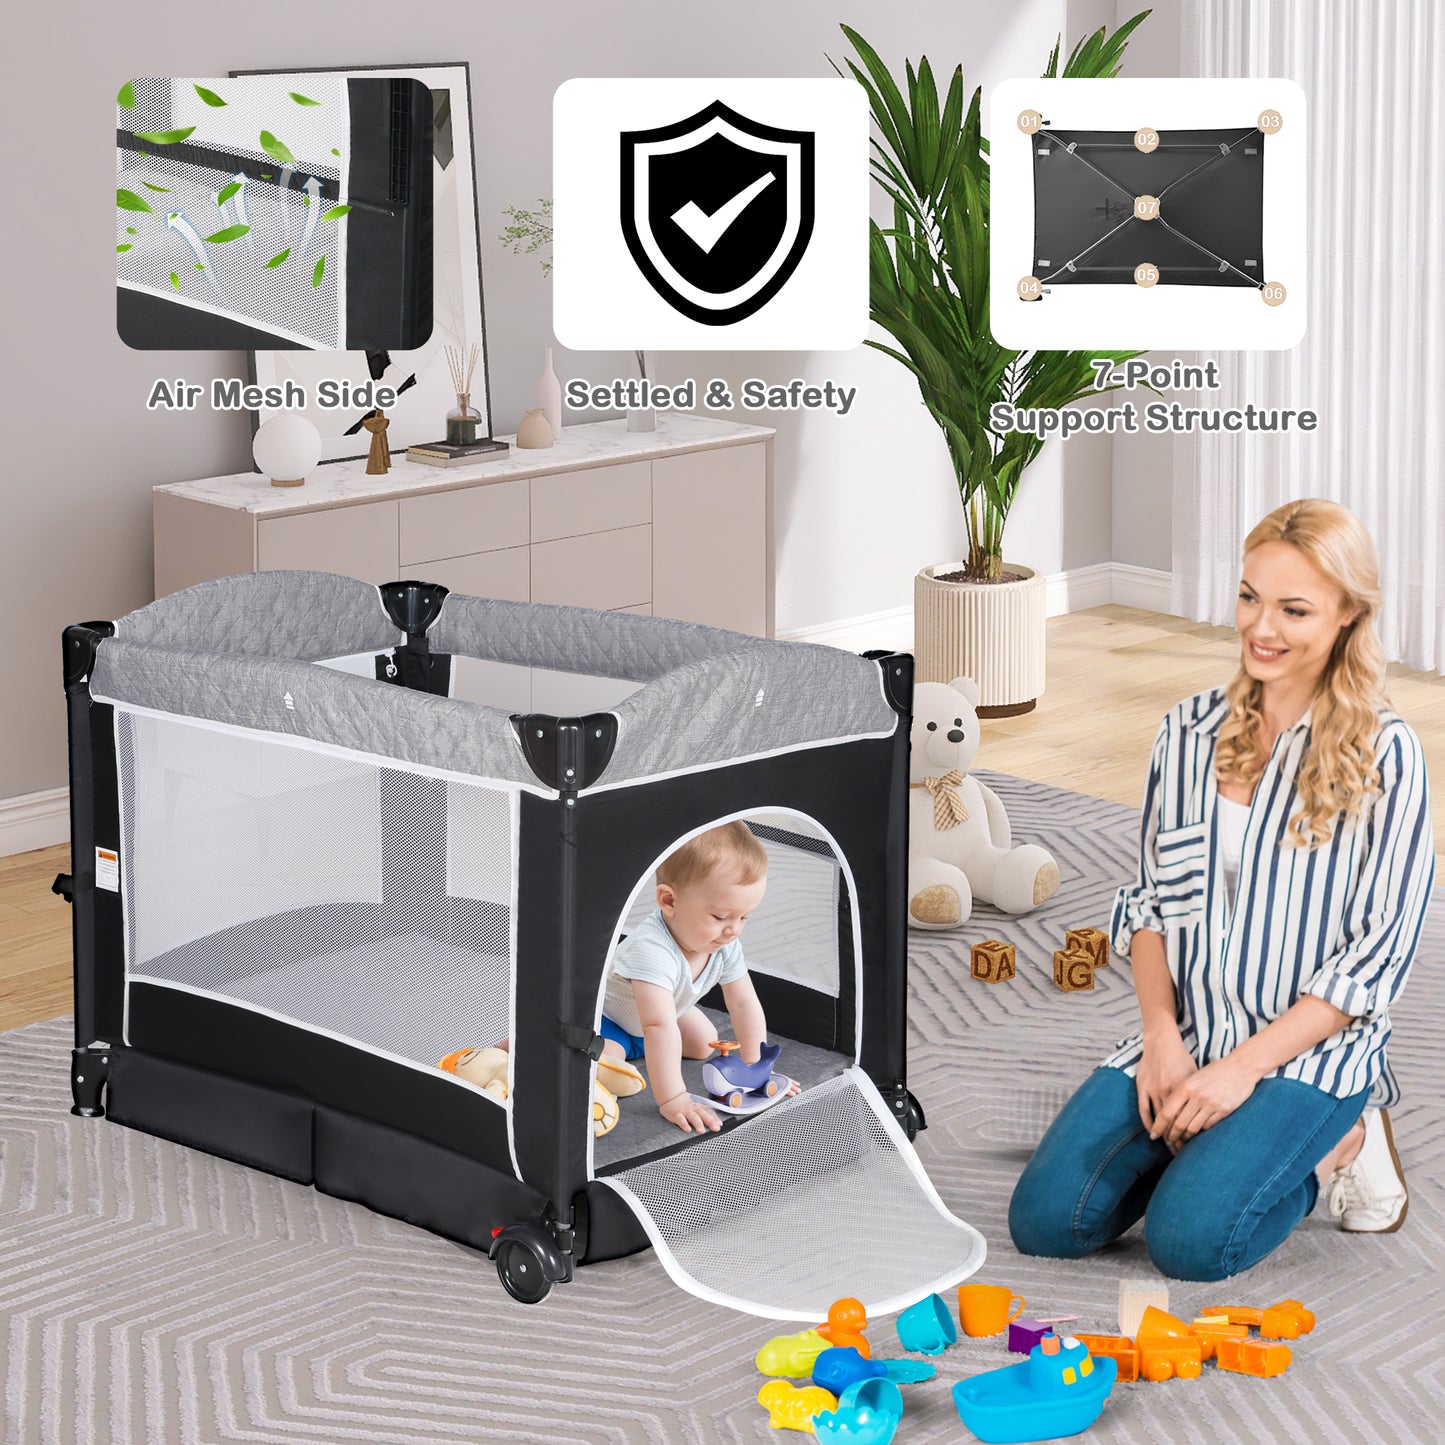 Unisex Nursery Center, 4 in 1 Foldable Baby Playard with Bassinet & Changing Table for Newborn